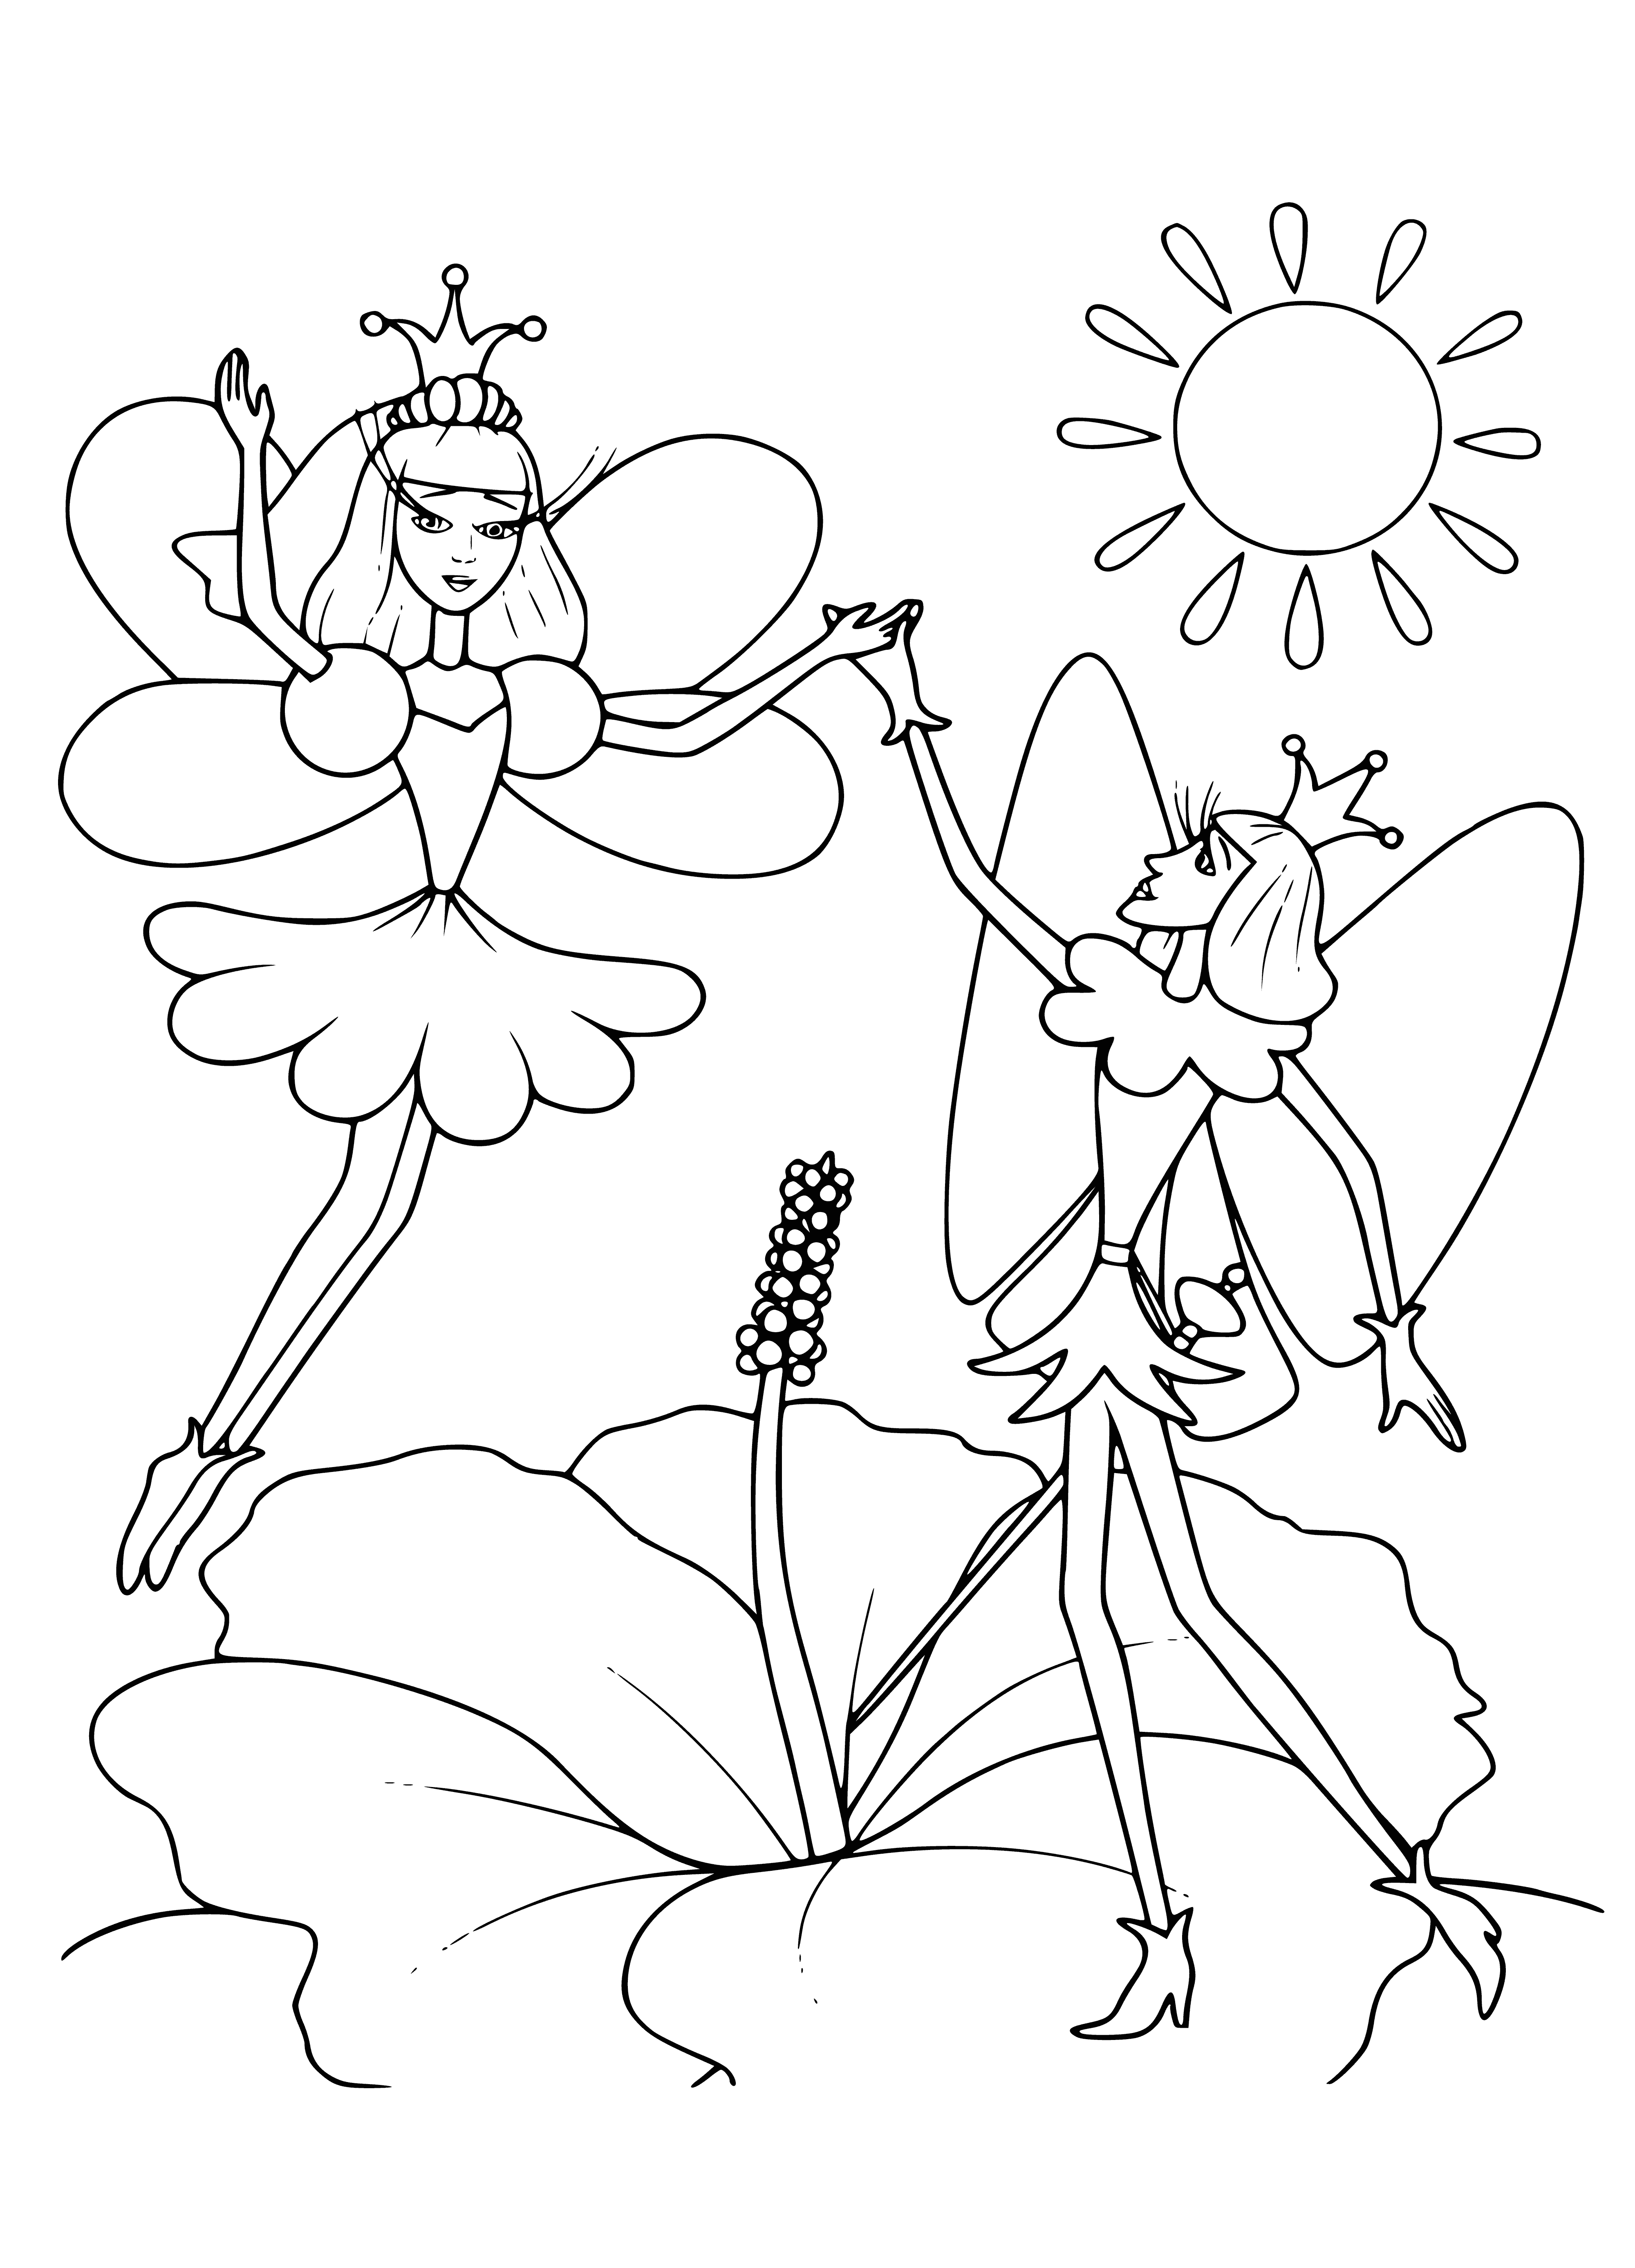 coloring page: Girl in white dress holds orange flower & talks to blue bird in a field of flowers.